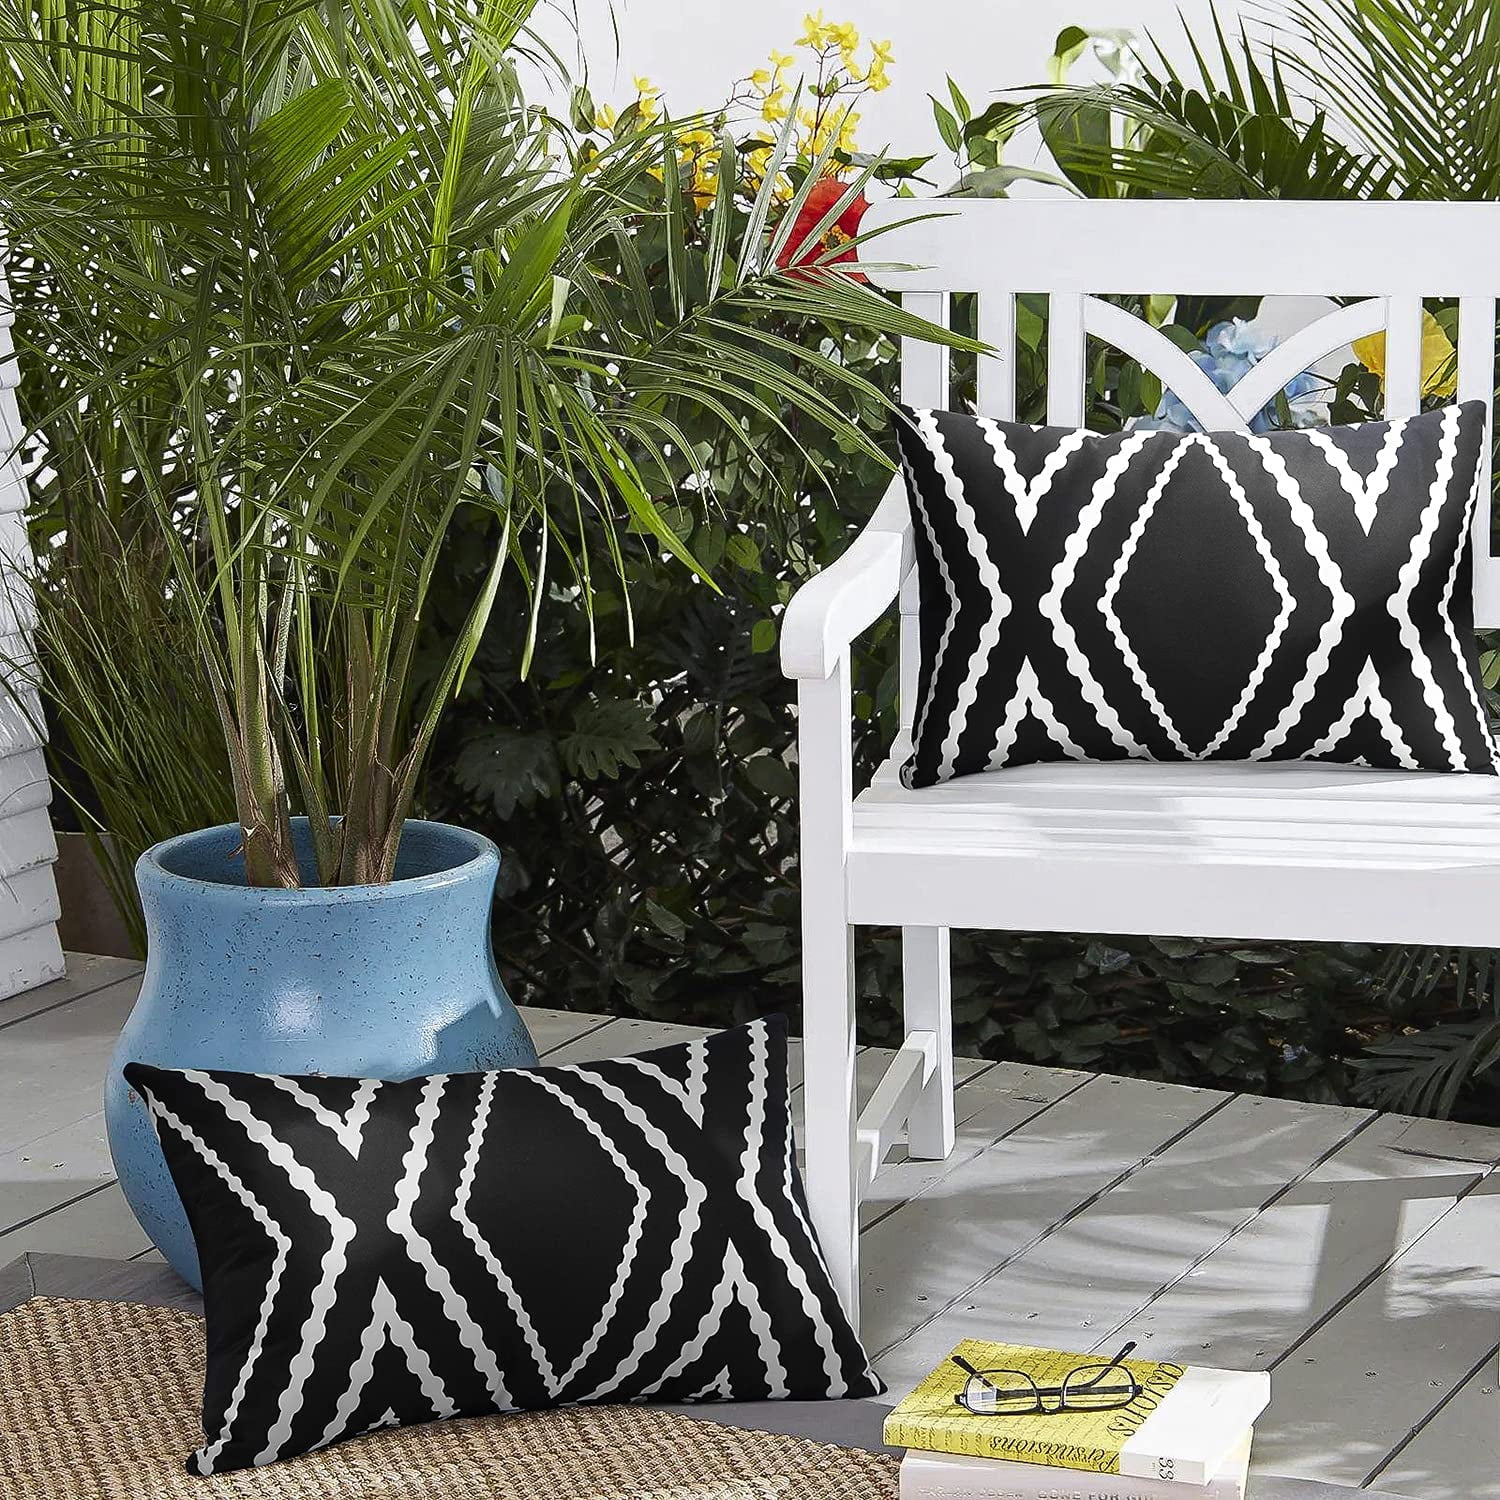 Adabana Outdoor Waterproof Boho Throw Pillow Covers Geometric Pillow Cases for Patio Garden Set of 2 18 X 18 Inches White